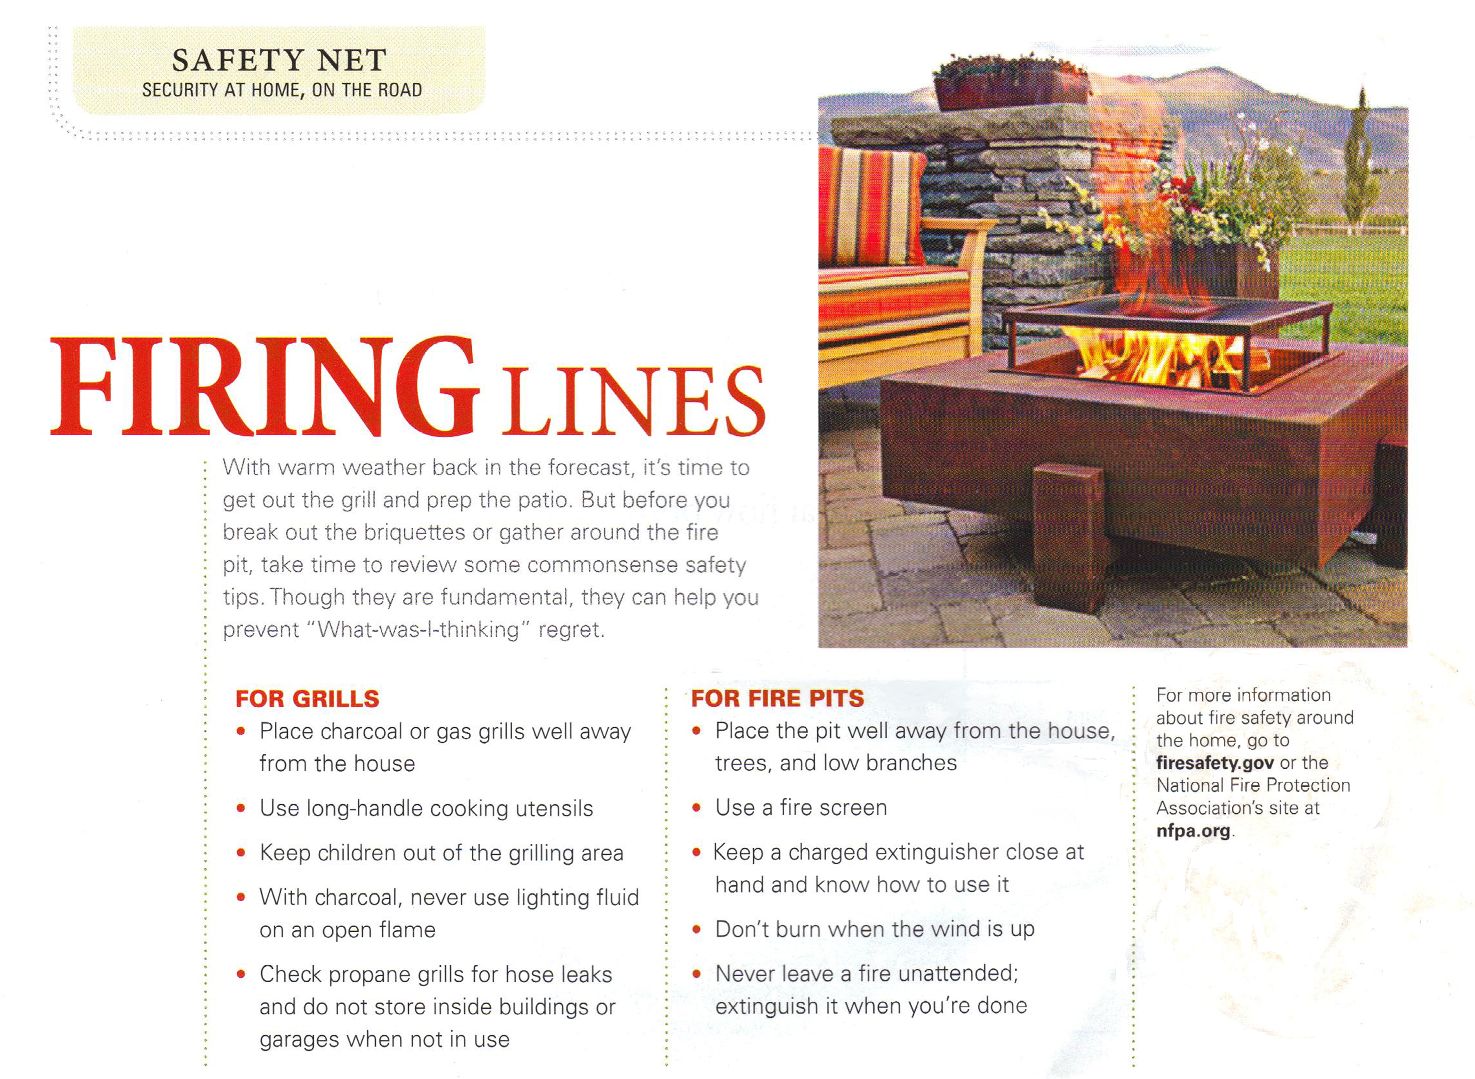 Safety For Use of Outdoor Grills and Fire Pits